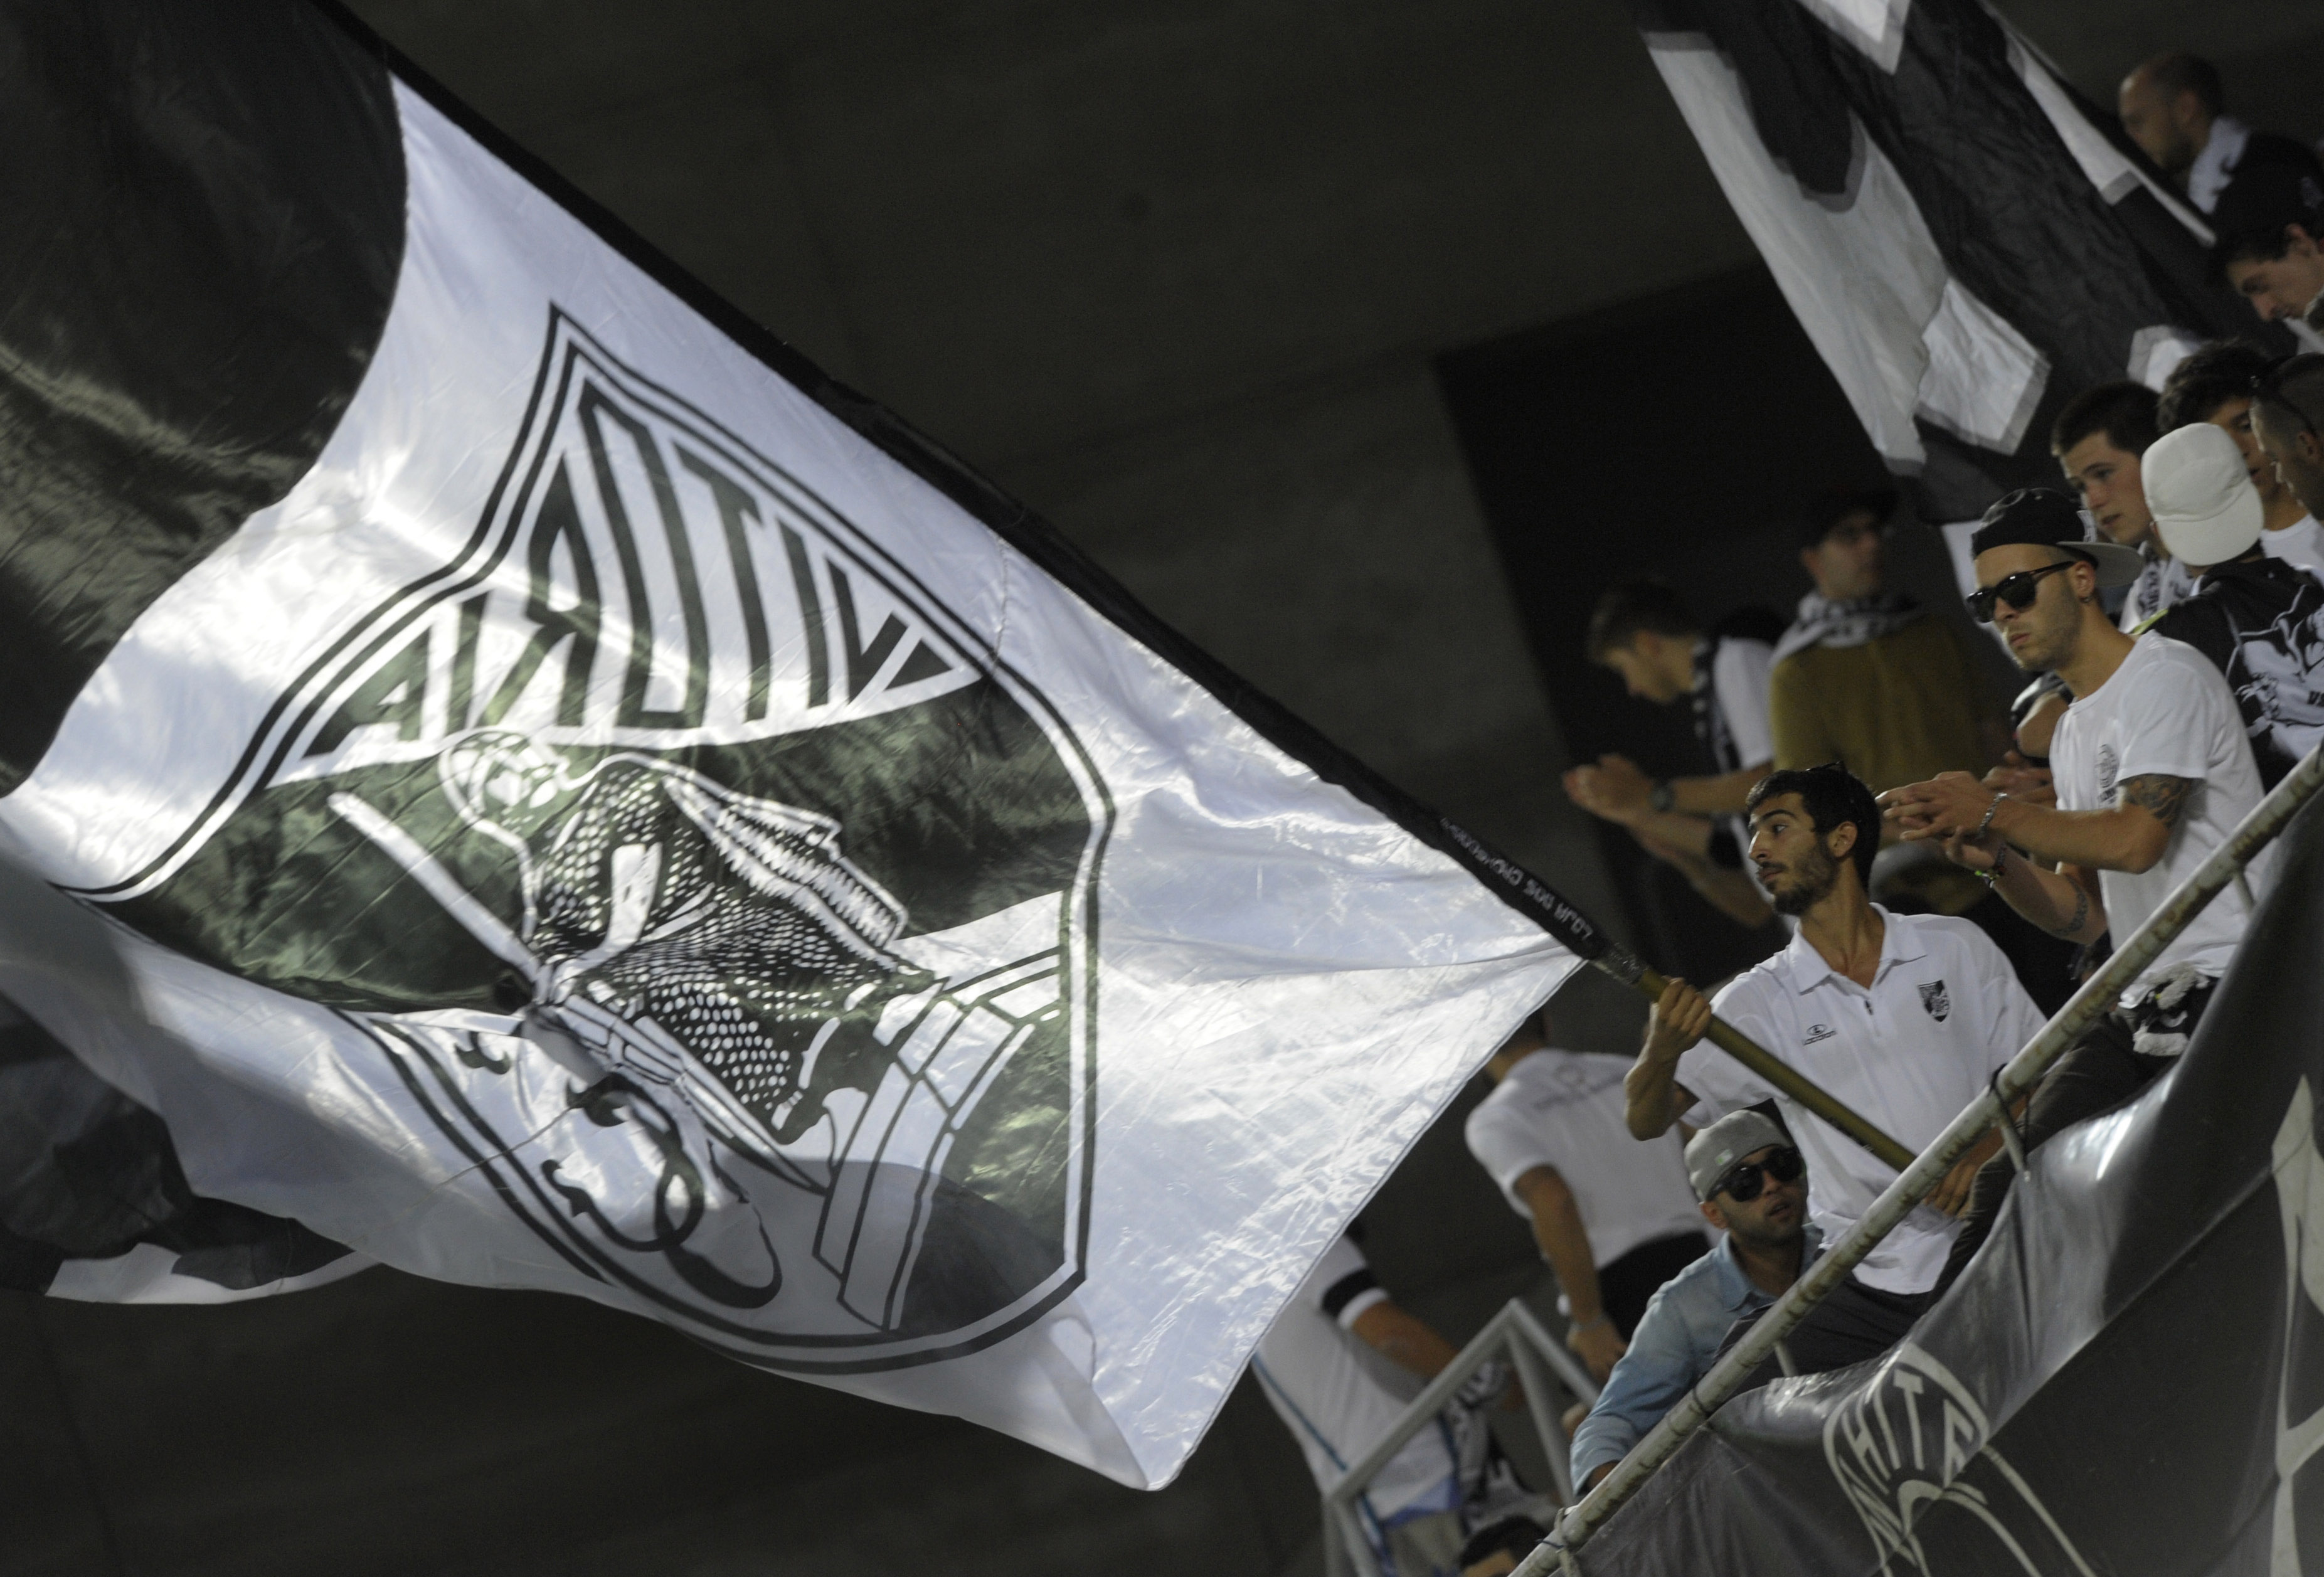 Vitoria SC supporters during the UEFA Europa League group stage match between Vitoria SC and HNK Rijeka held on September 19, 2013 at the Estadio D. Afonso Henriques, in Guimaraes, Portugal. 